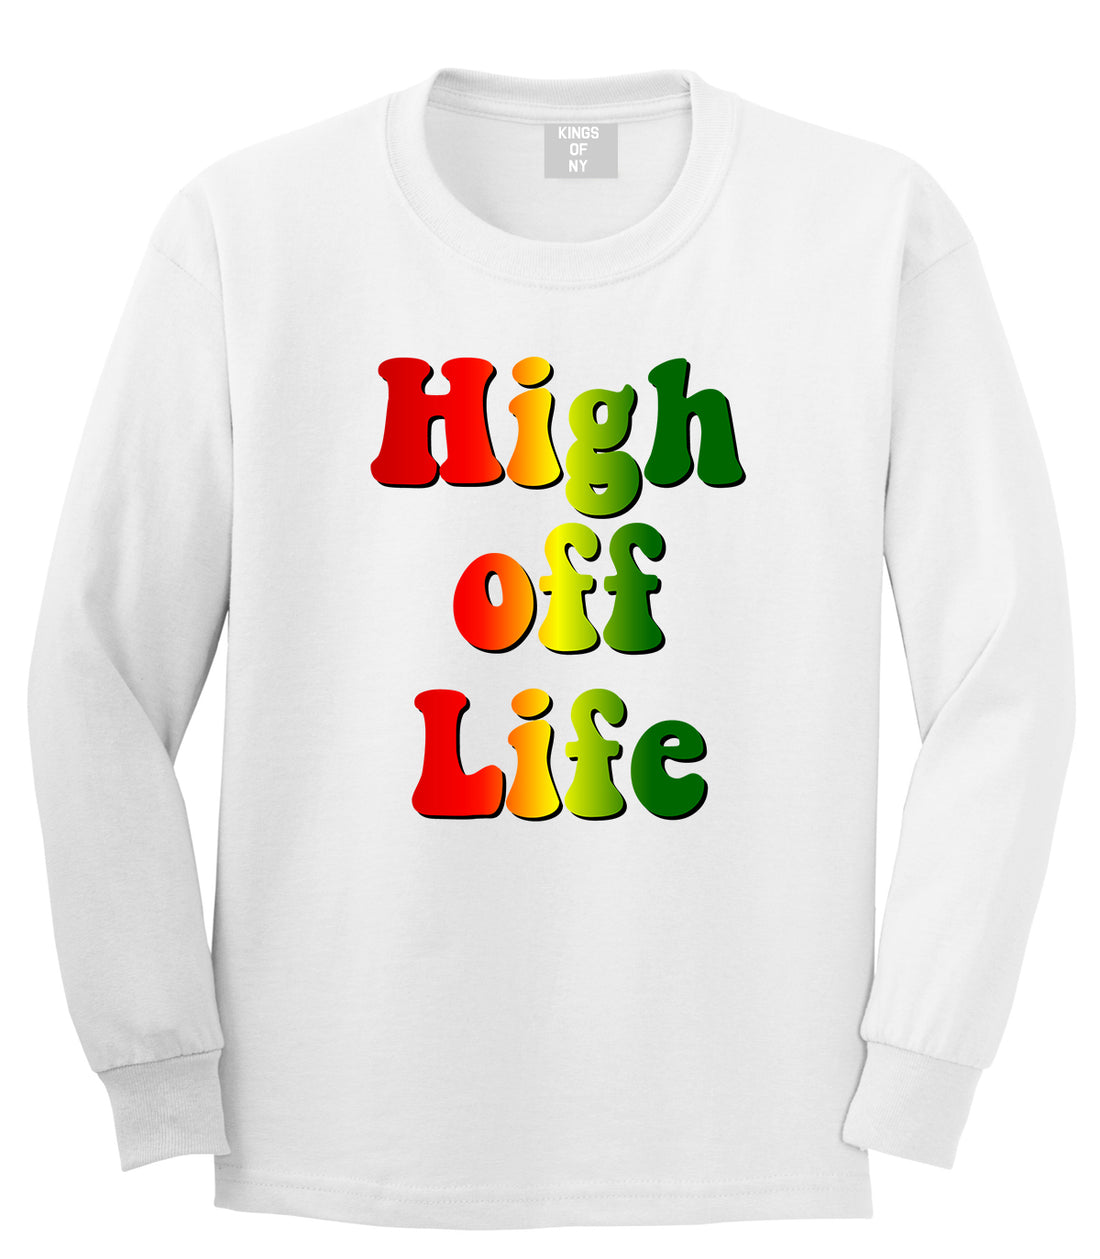 High Off Life Mens Long Sleeve T-Shirt White by Kings Of NY